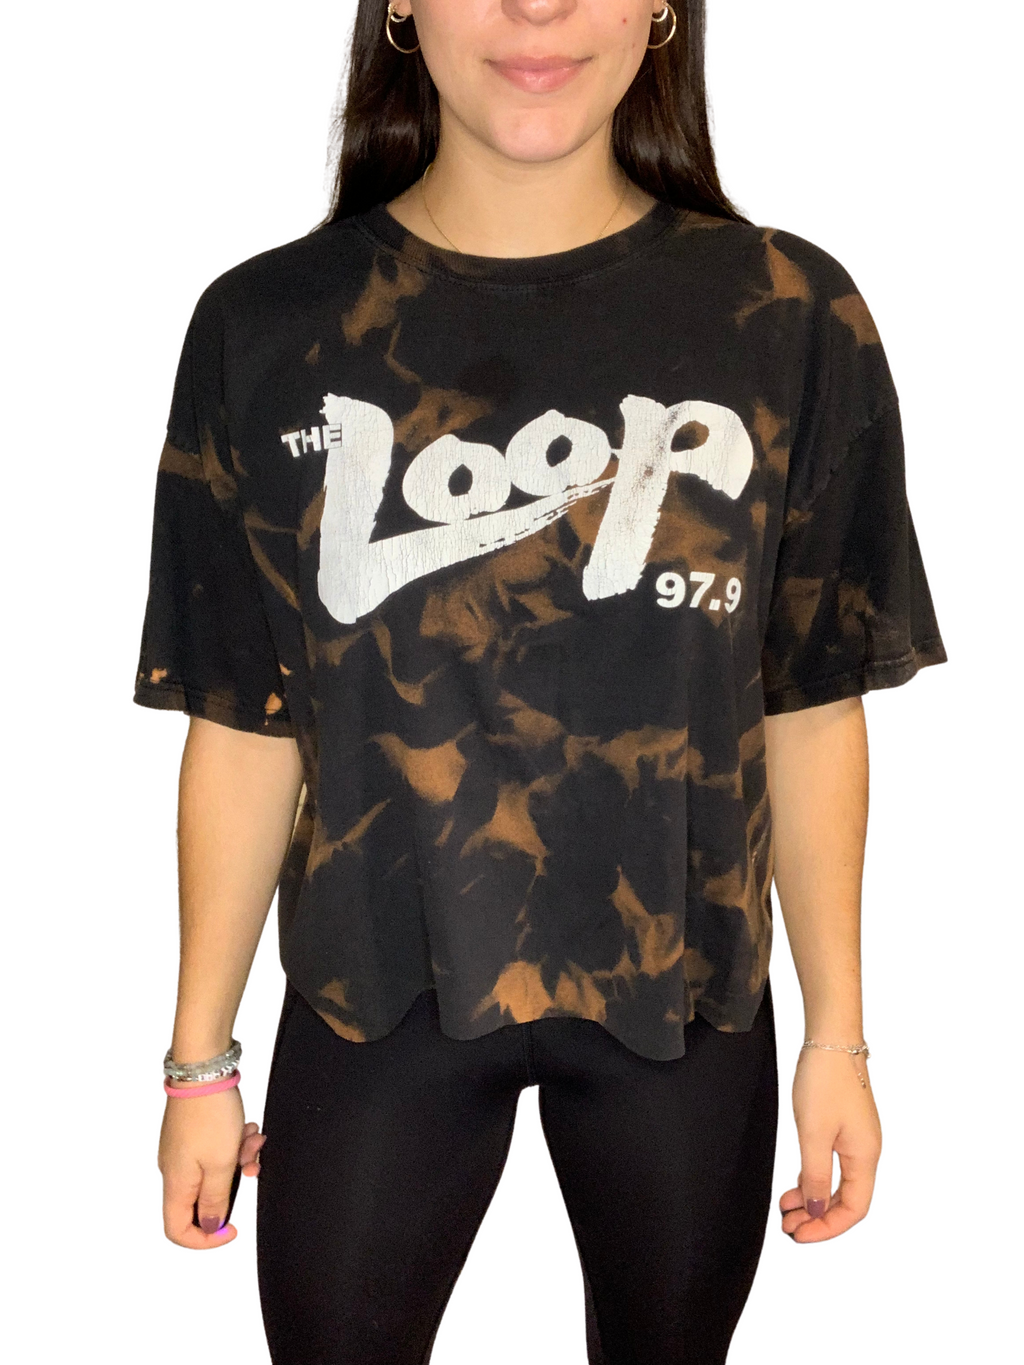 The Loop Bleached & Cropped Shirt